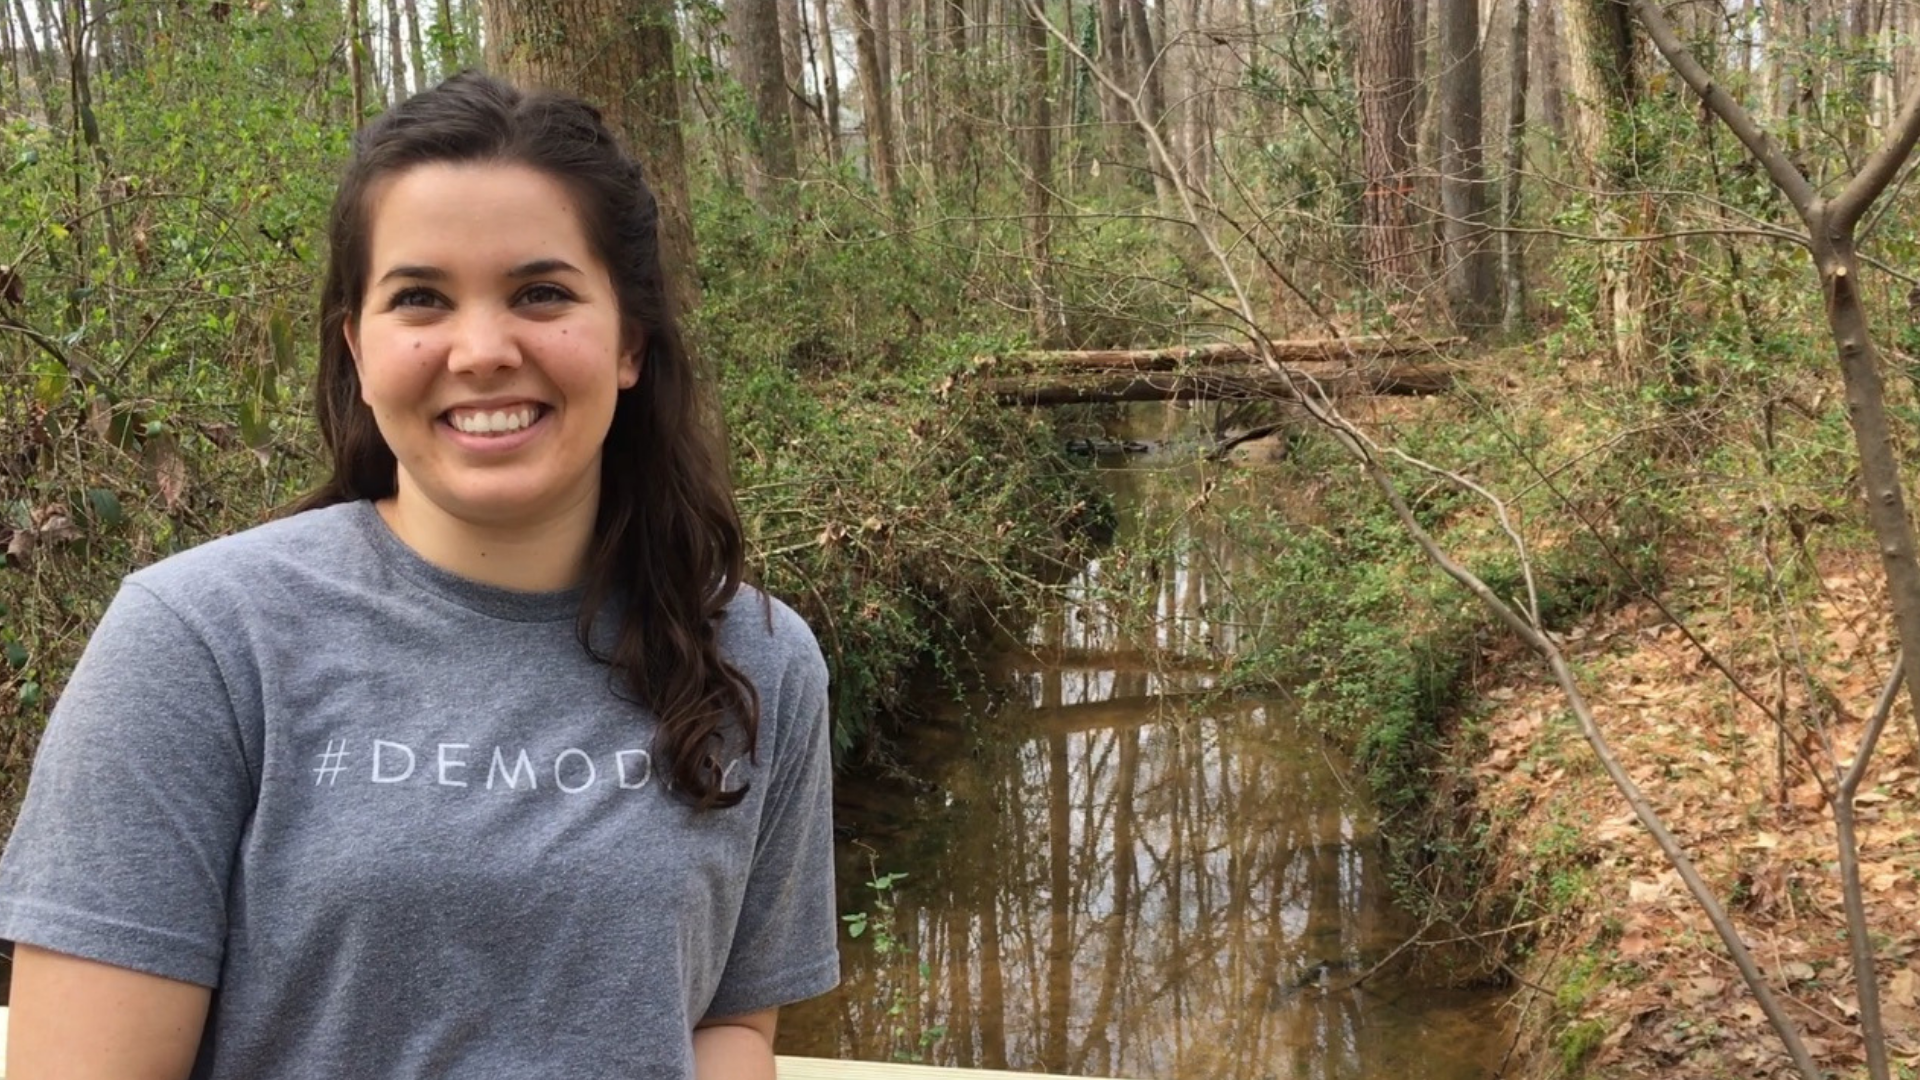 Meet our New Day Camp Director, Lydia Churillo